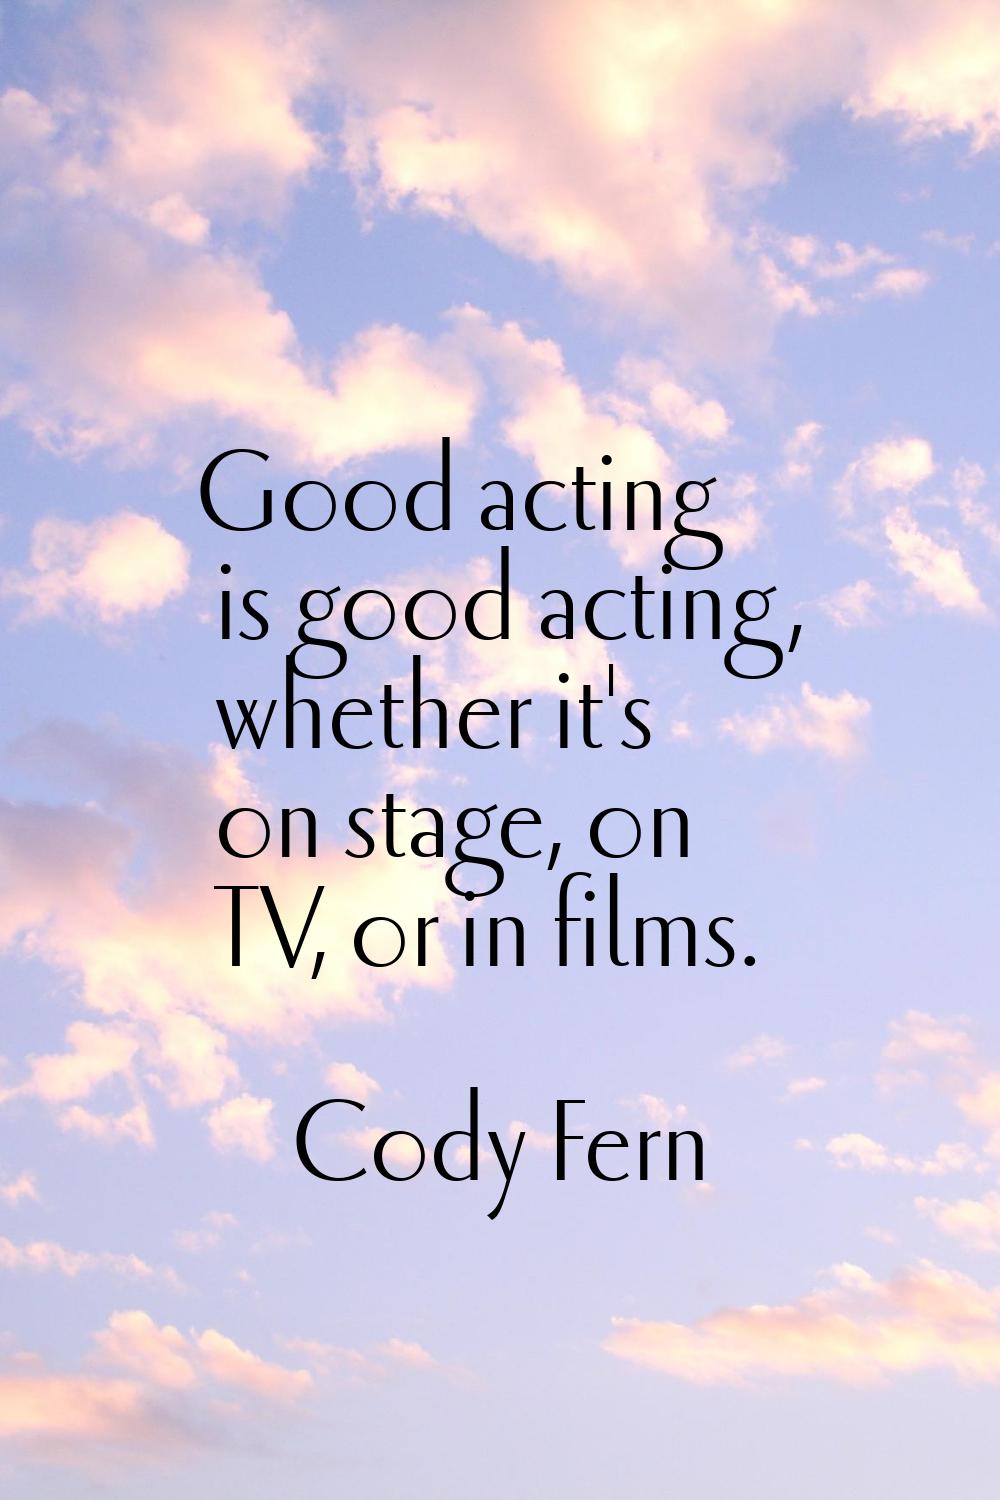 Good acting is good acting, whether it's on stage, on TV, or in films.